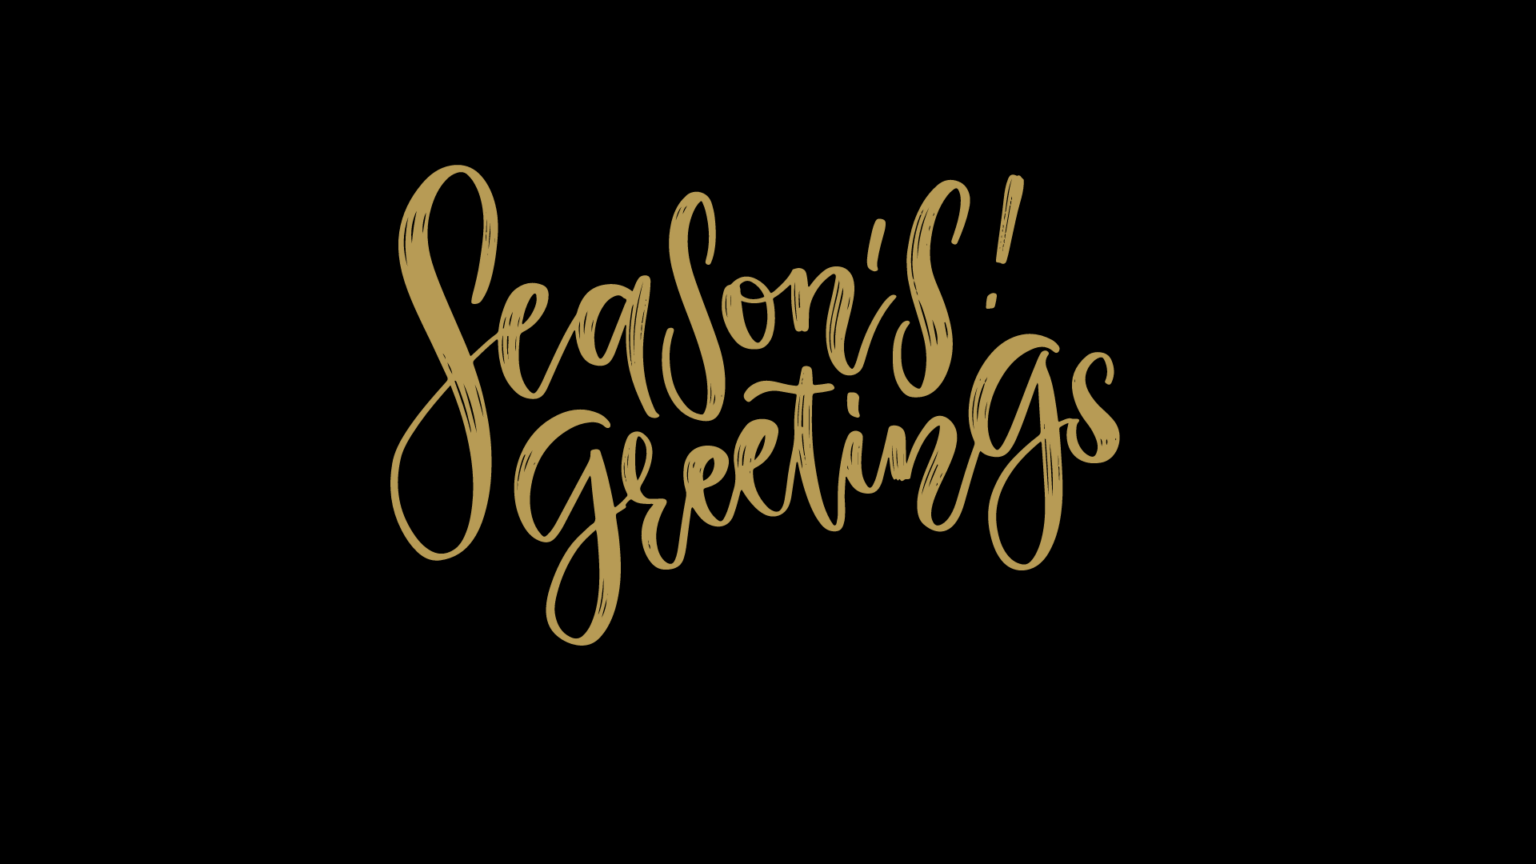 Season's Greetings in gold on black background